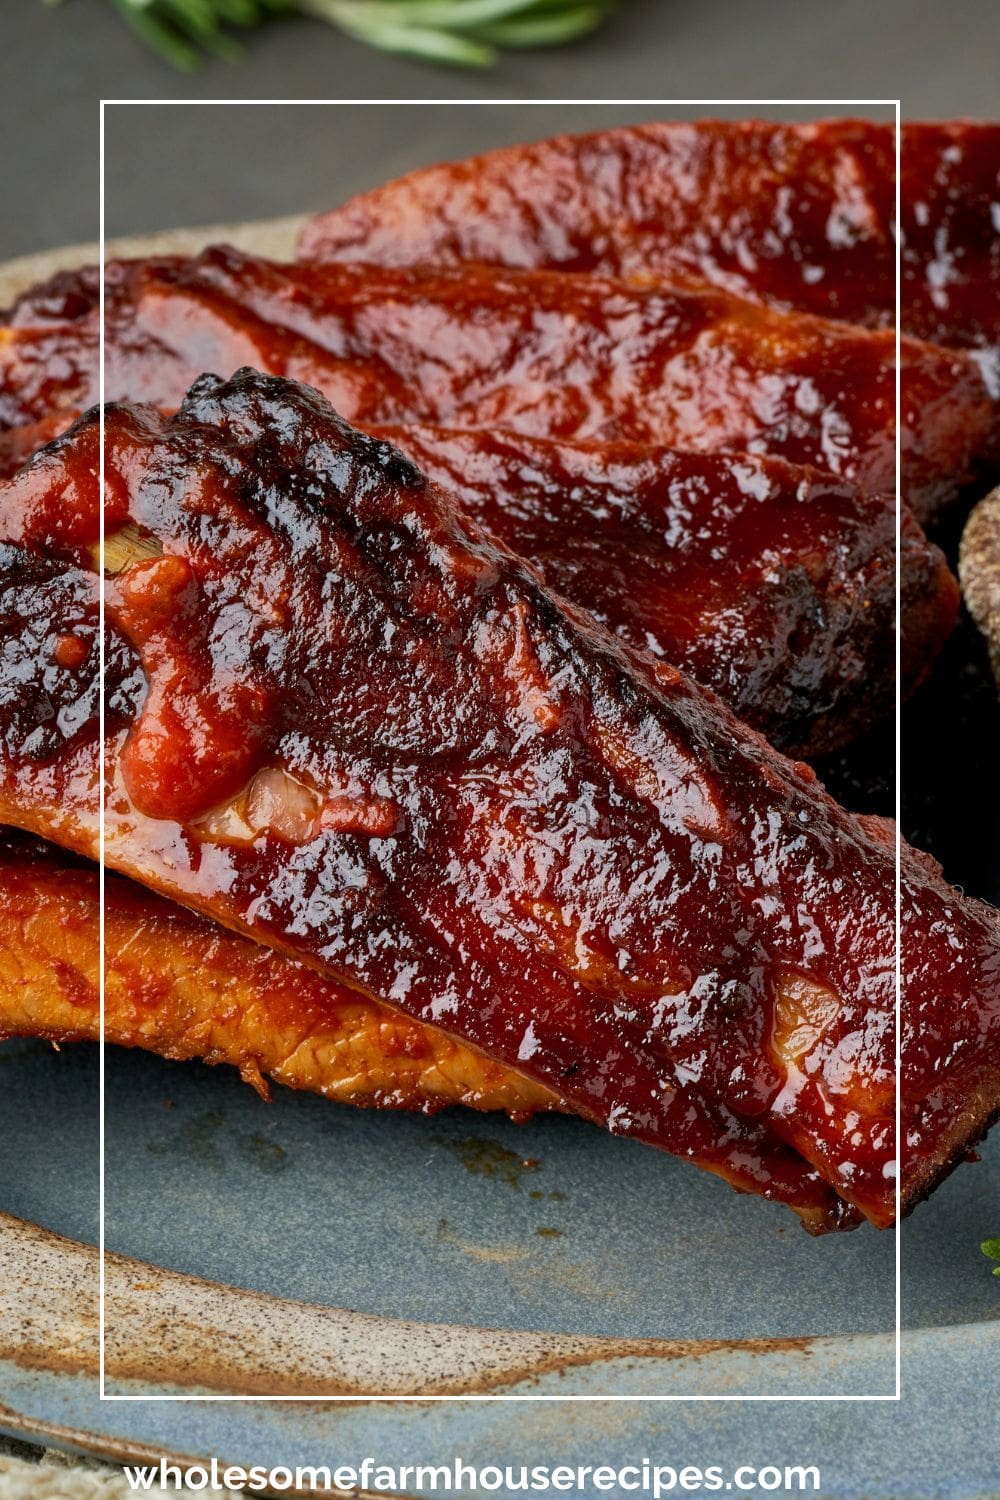 Grilled Country-Style Pork Ribs with BBQ Sauce